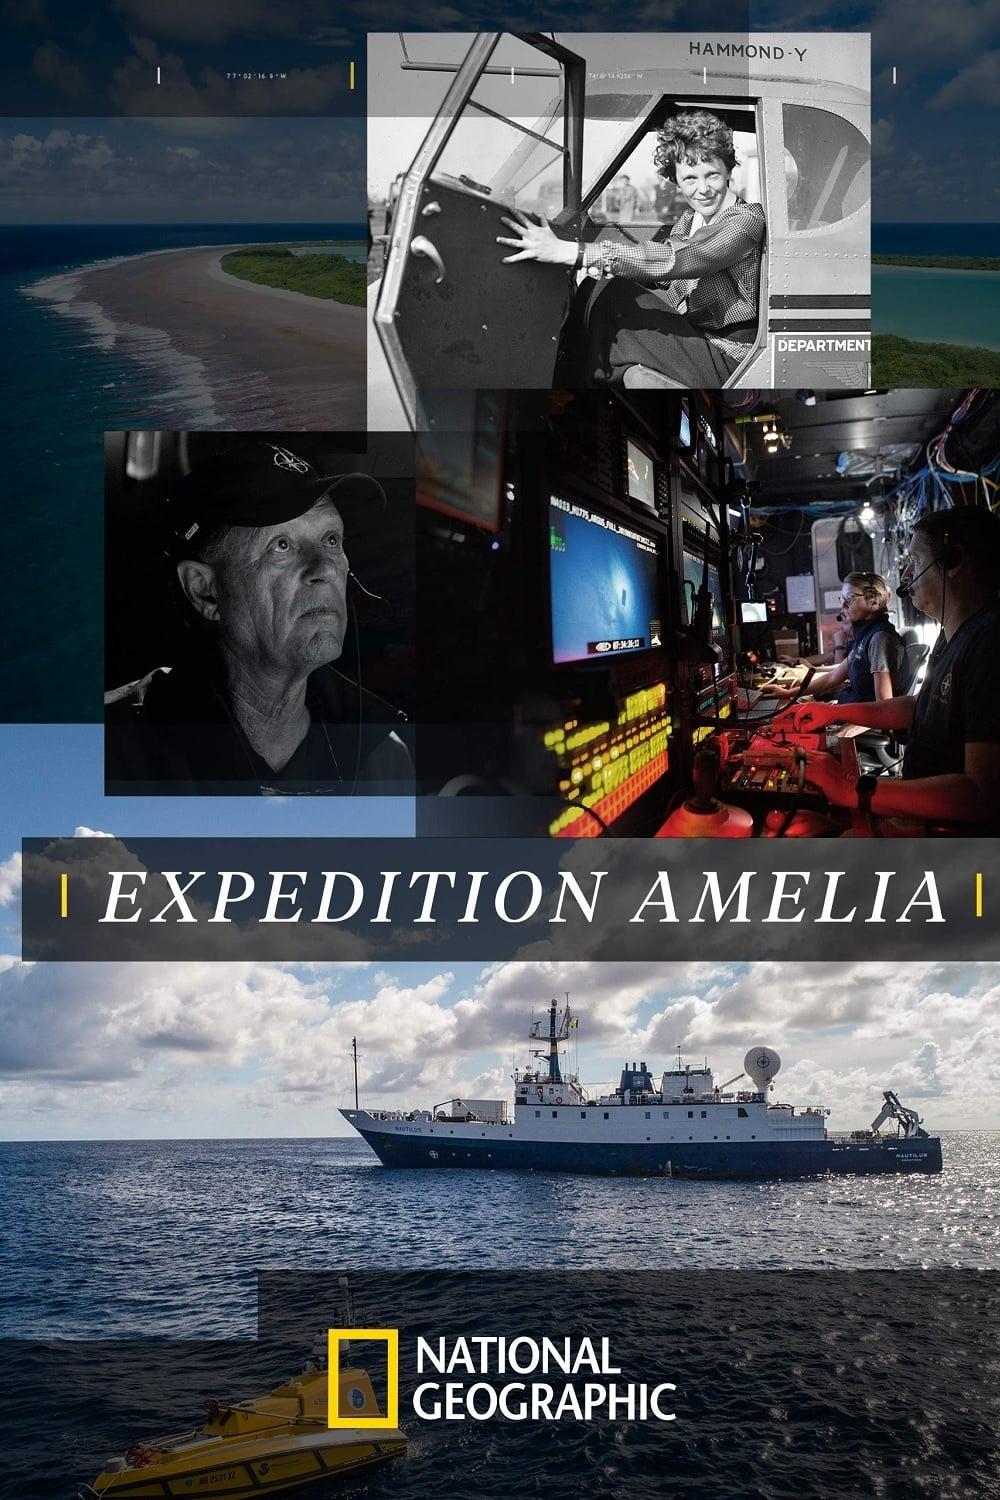 Expedition Amelia poster